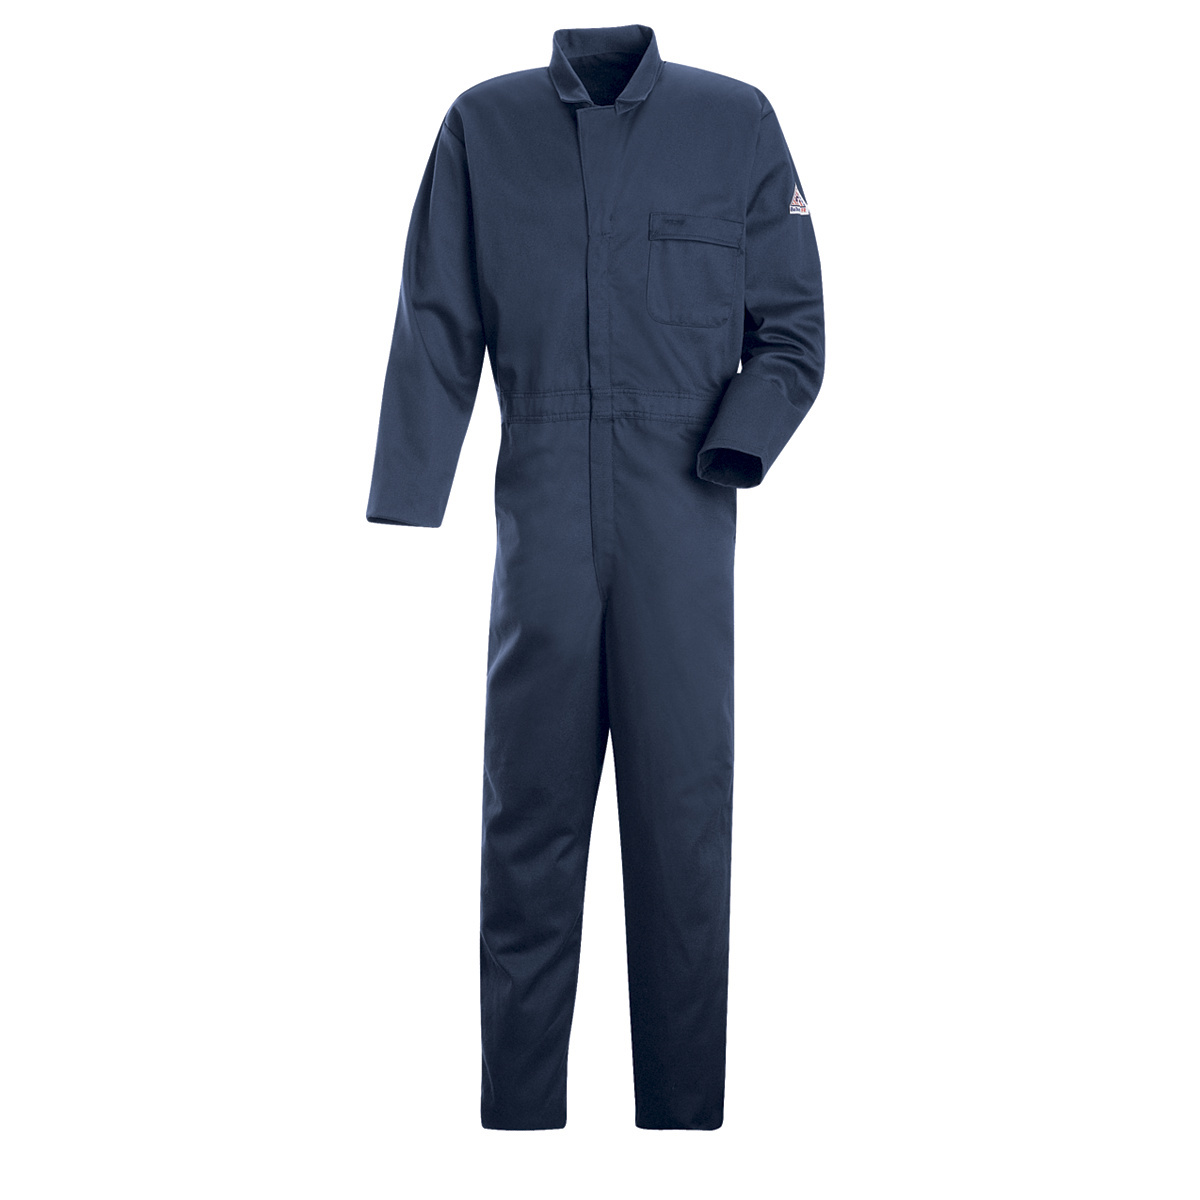 Bulwark® Medium Regular Navy Blue EXCEL FR® Twill Cotton Flame Resistant Coveralls With Zipper Front Closure